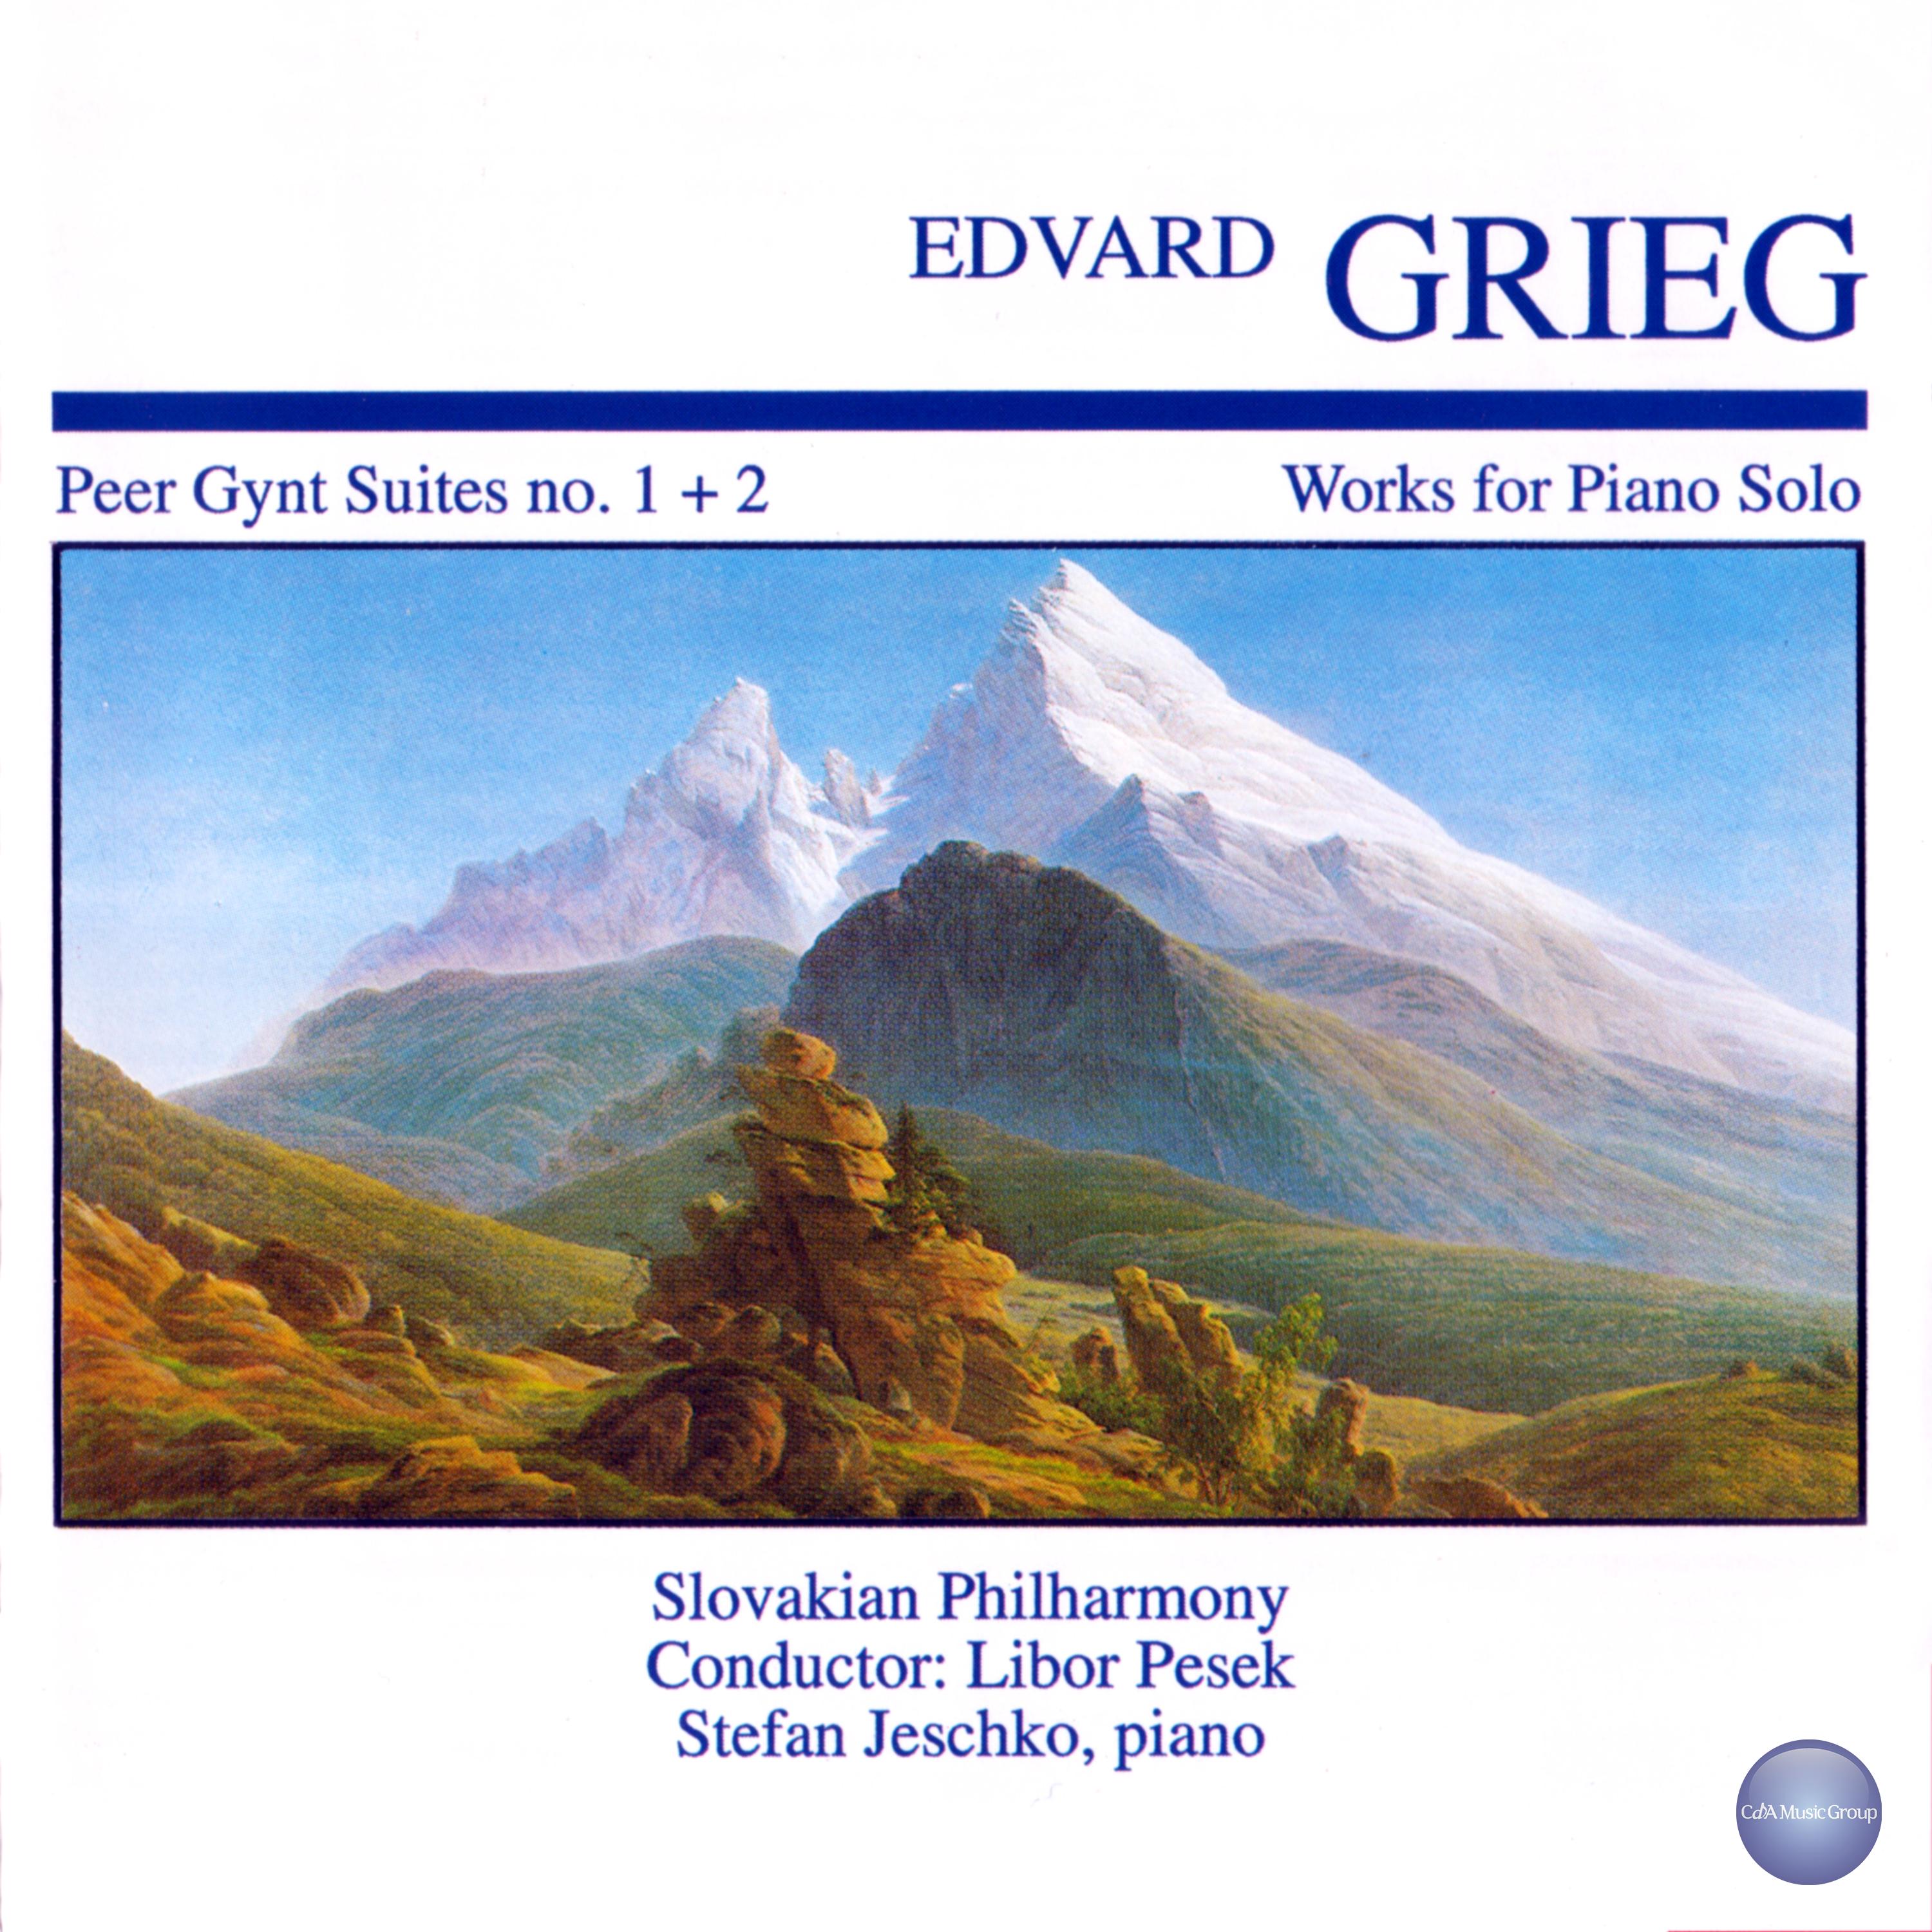 Grieg: Peer Gynt Suite No. 1, Op. 46 and Suite No. 2, Op. 55 - Works for Piano Solo